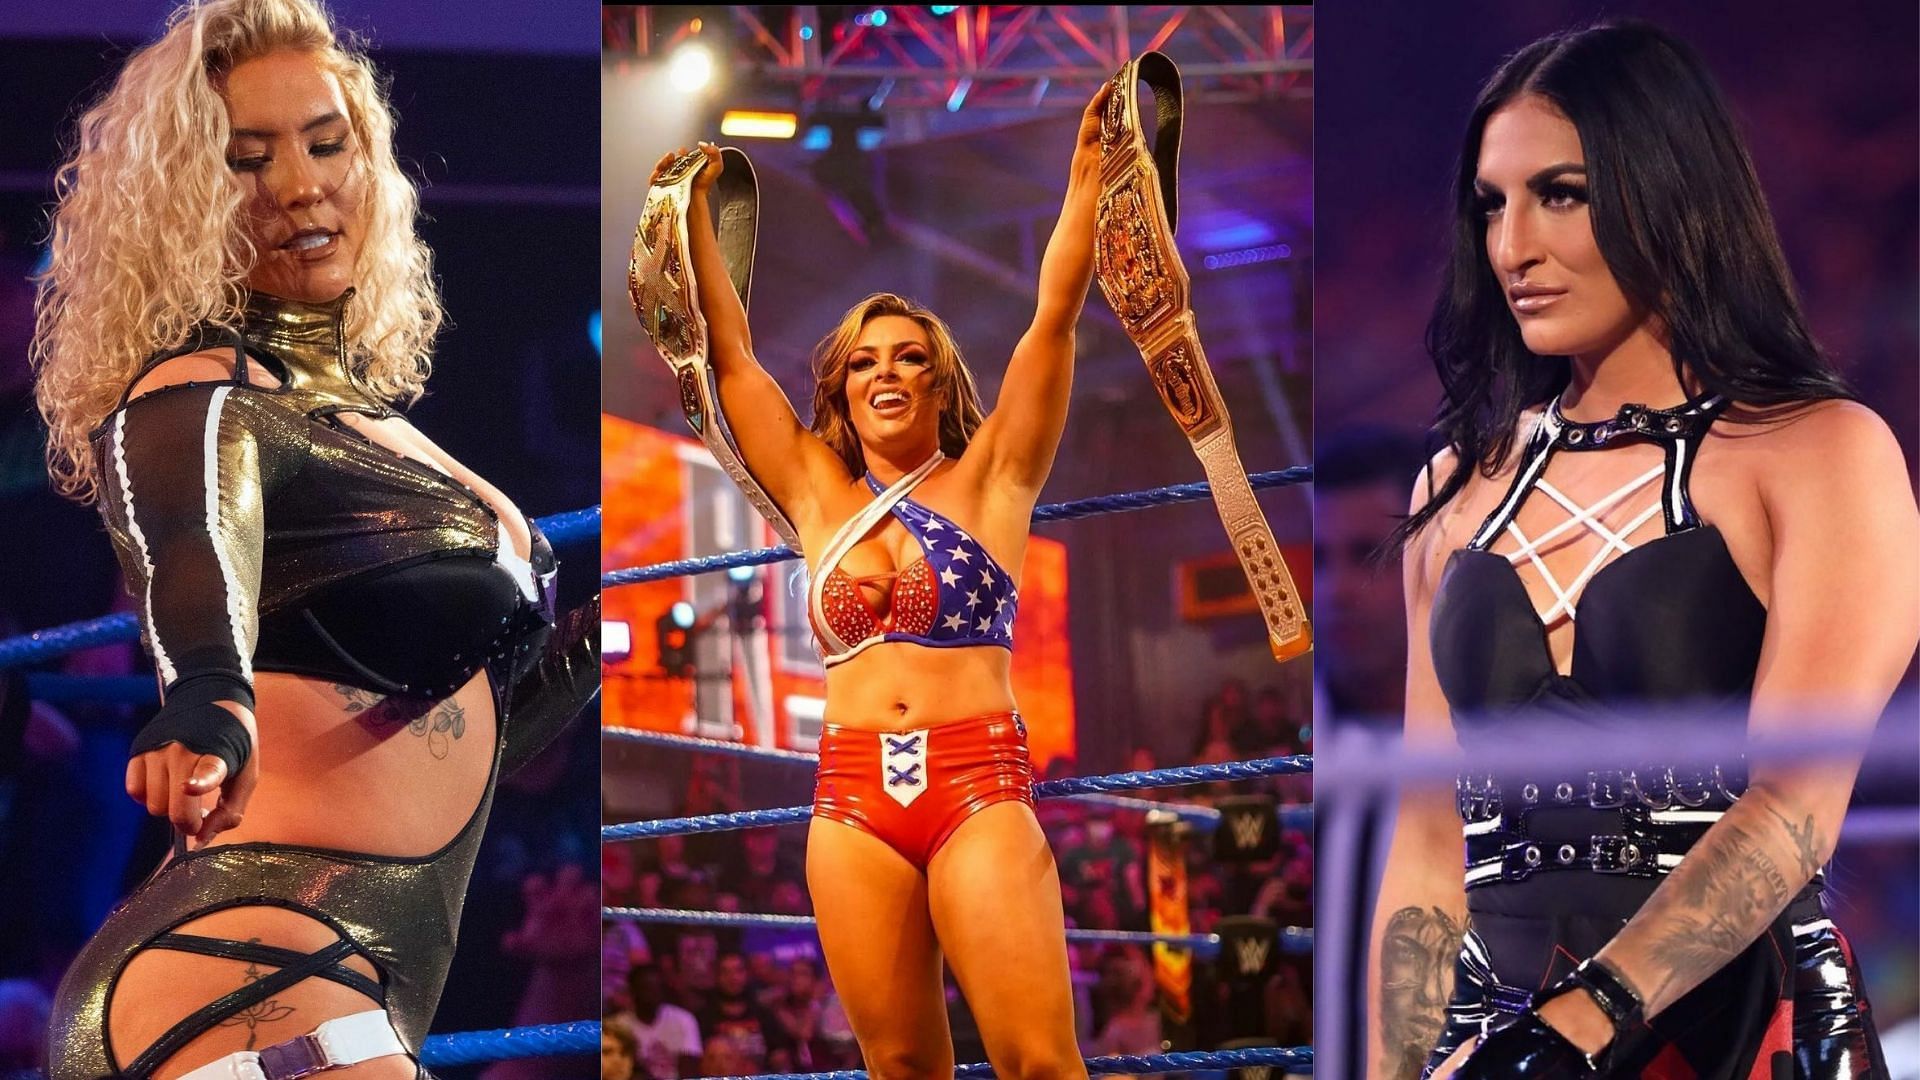 Nikkita Lyons, Sonya Deville, and others have reacted to Mandy Rose